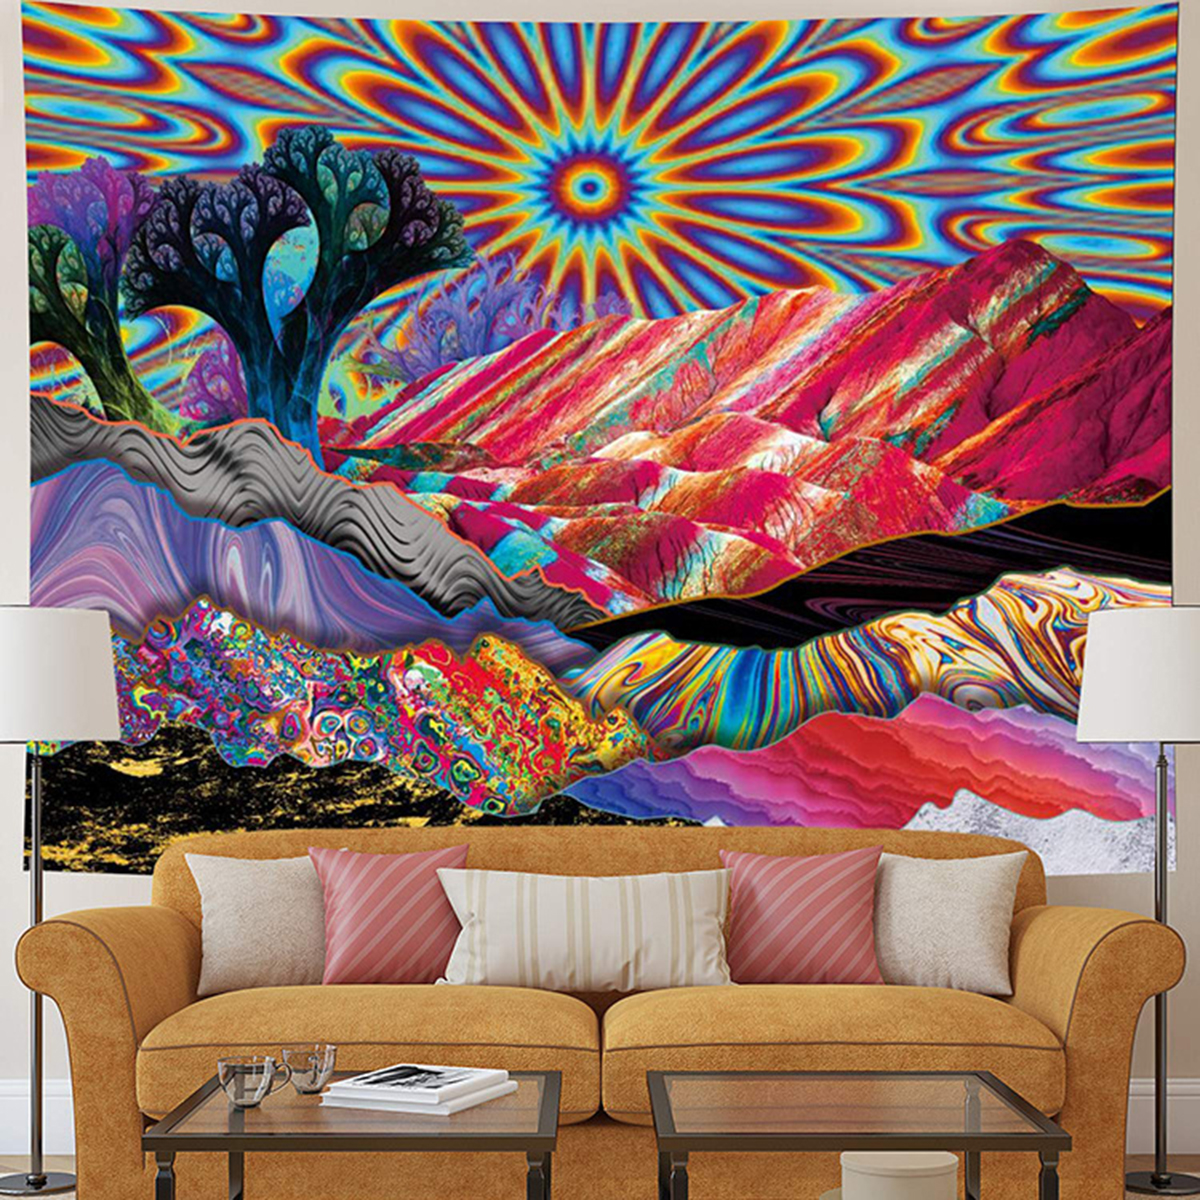 Mandela Wall hanging Tapestry Psychedelic Pattern Yoga Throw Beach Throw Carpet Hippie Home Decor Background Art Tapestry